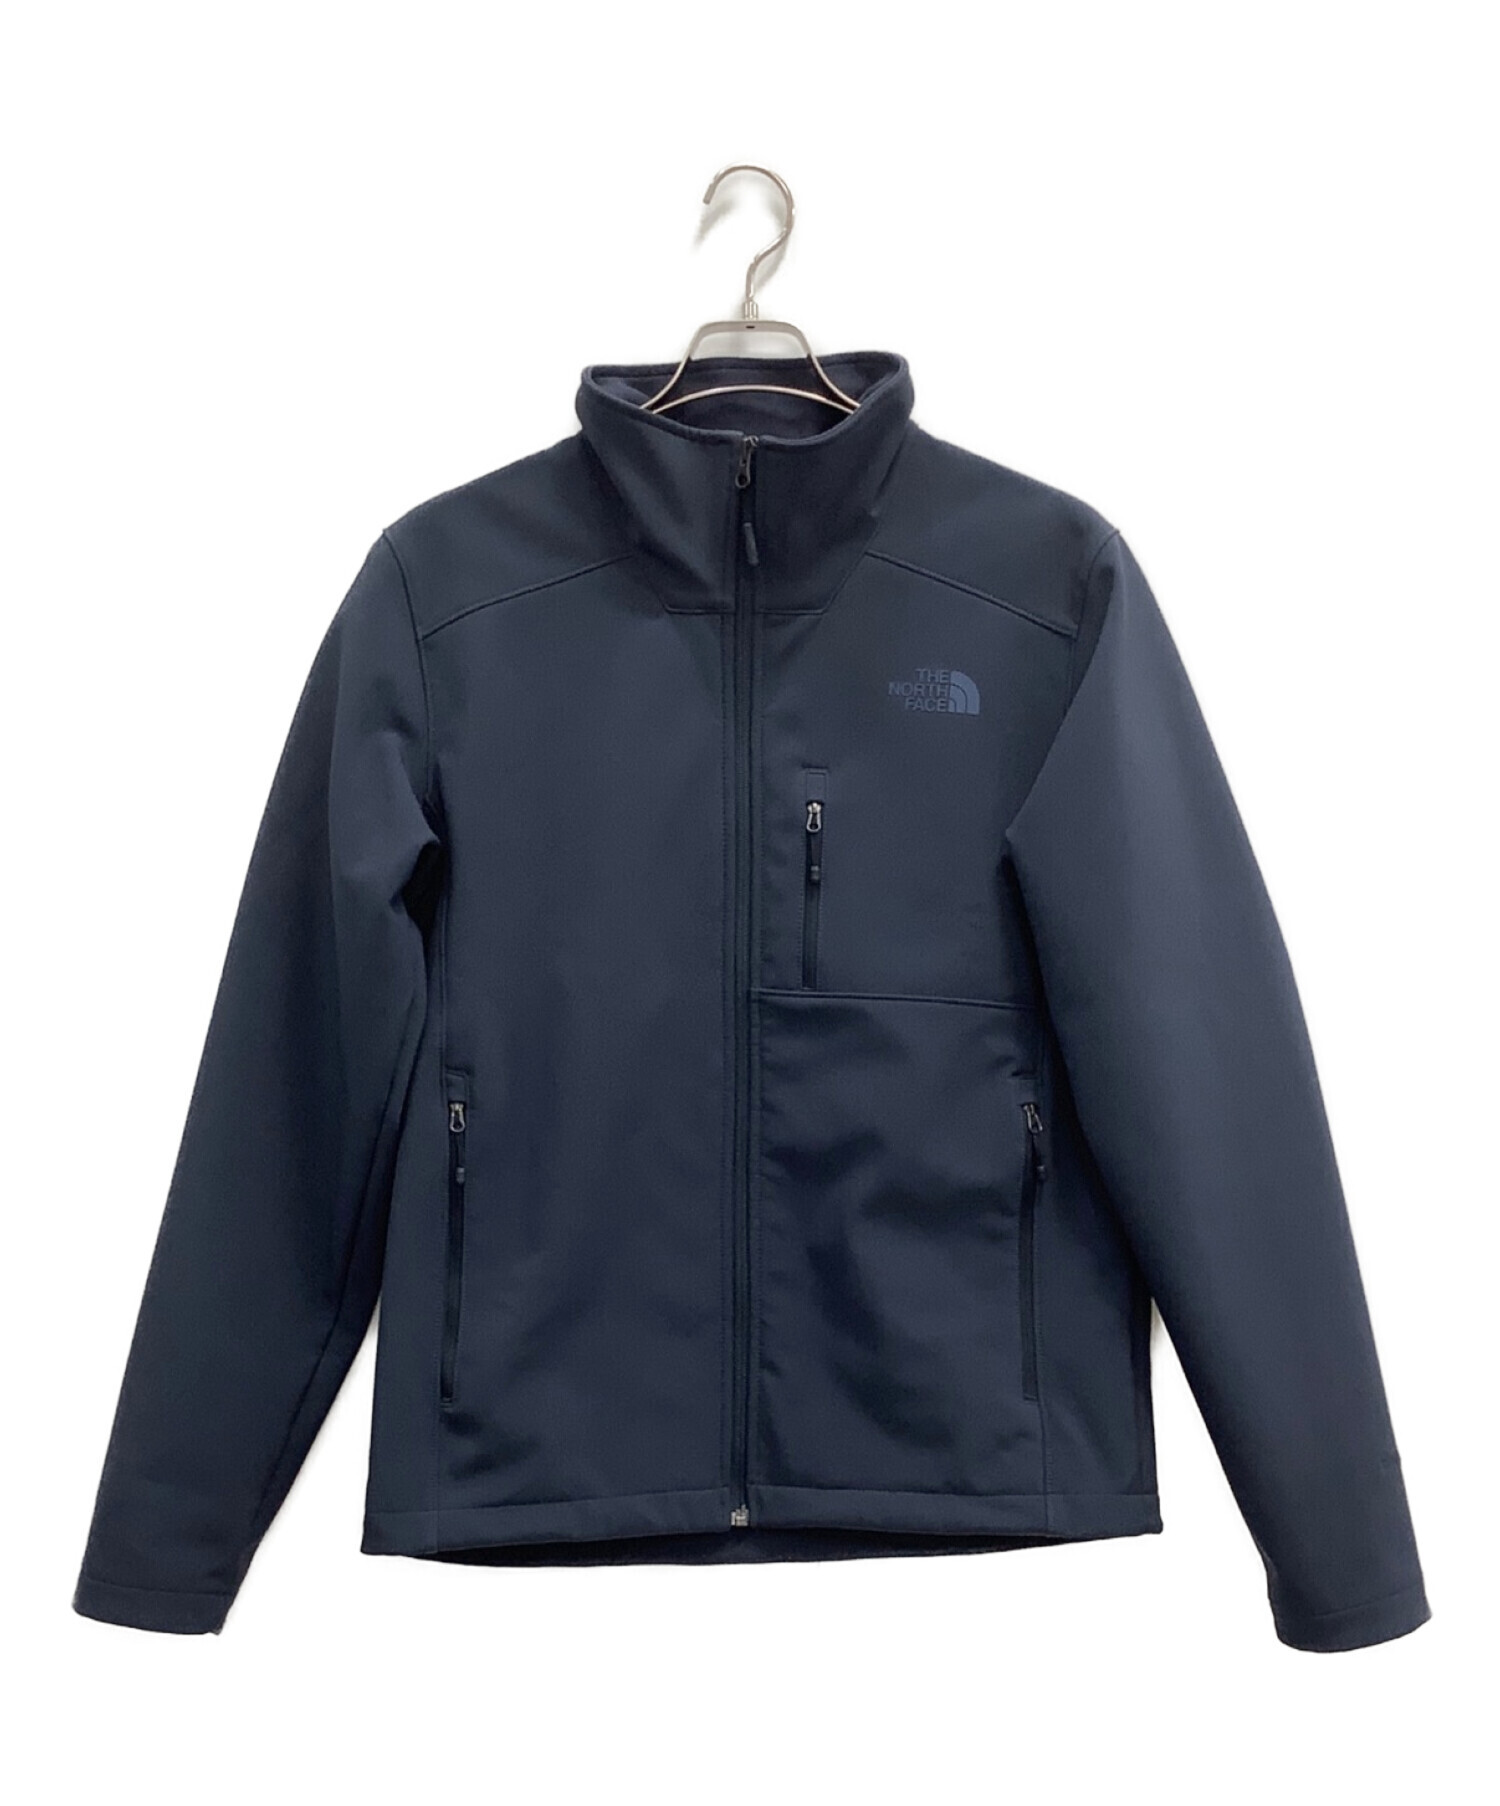 THE NORTH FACE ジャケット　NP51802Z